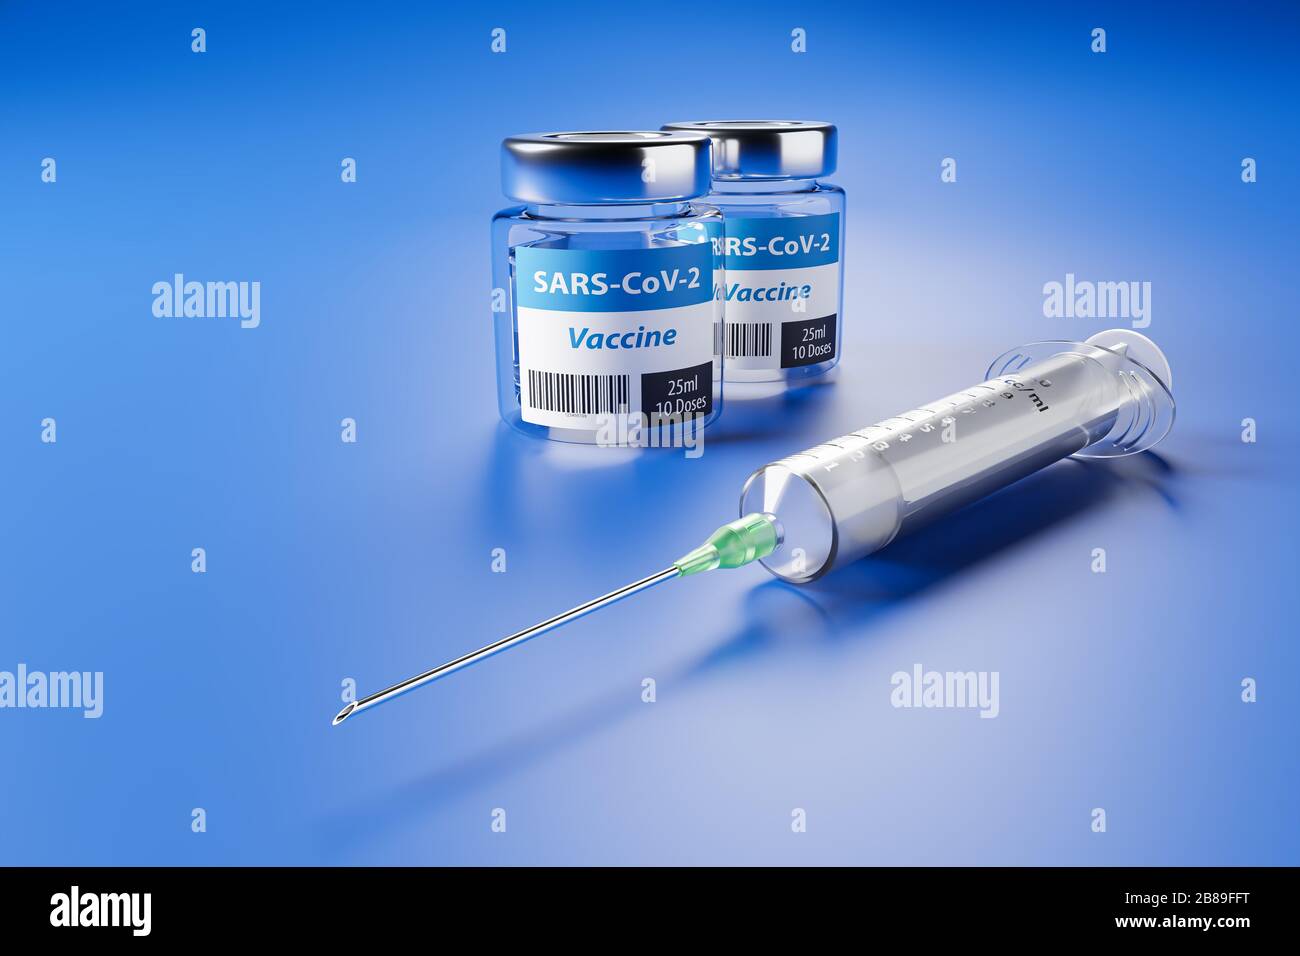 Vaccination against the new Corona Virus SARS-CoV-2: Two glass containers with 10 doses each and a syringe in front. Stock Photo